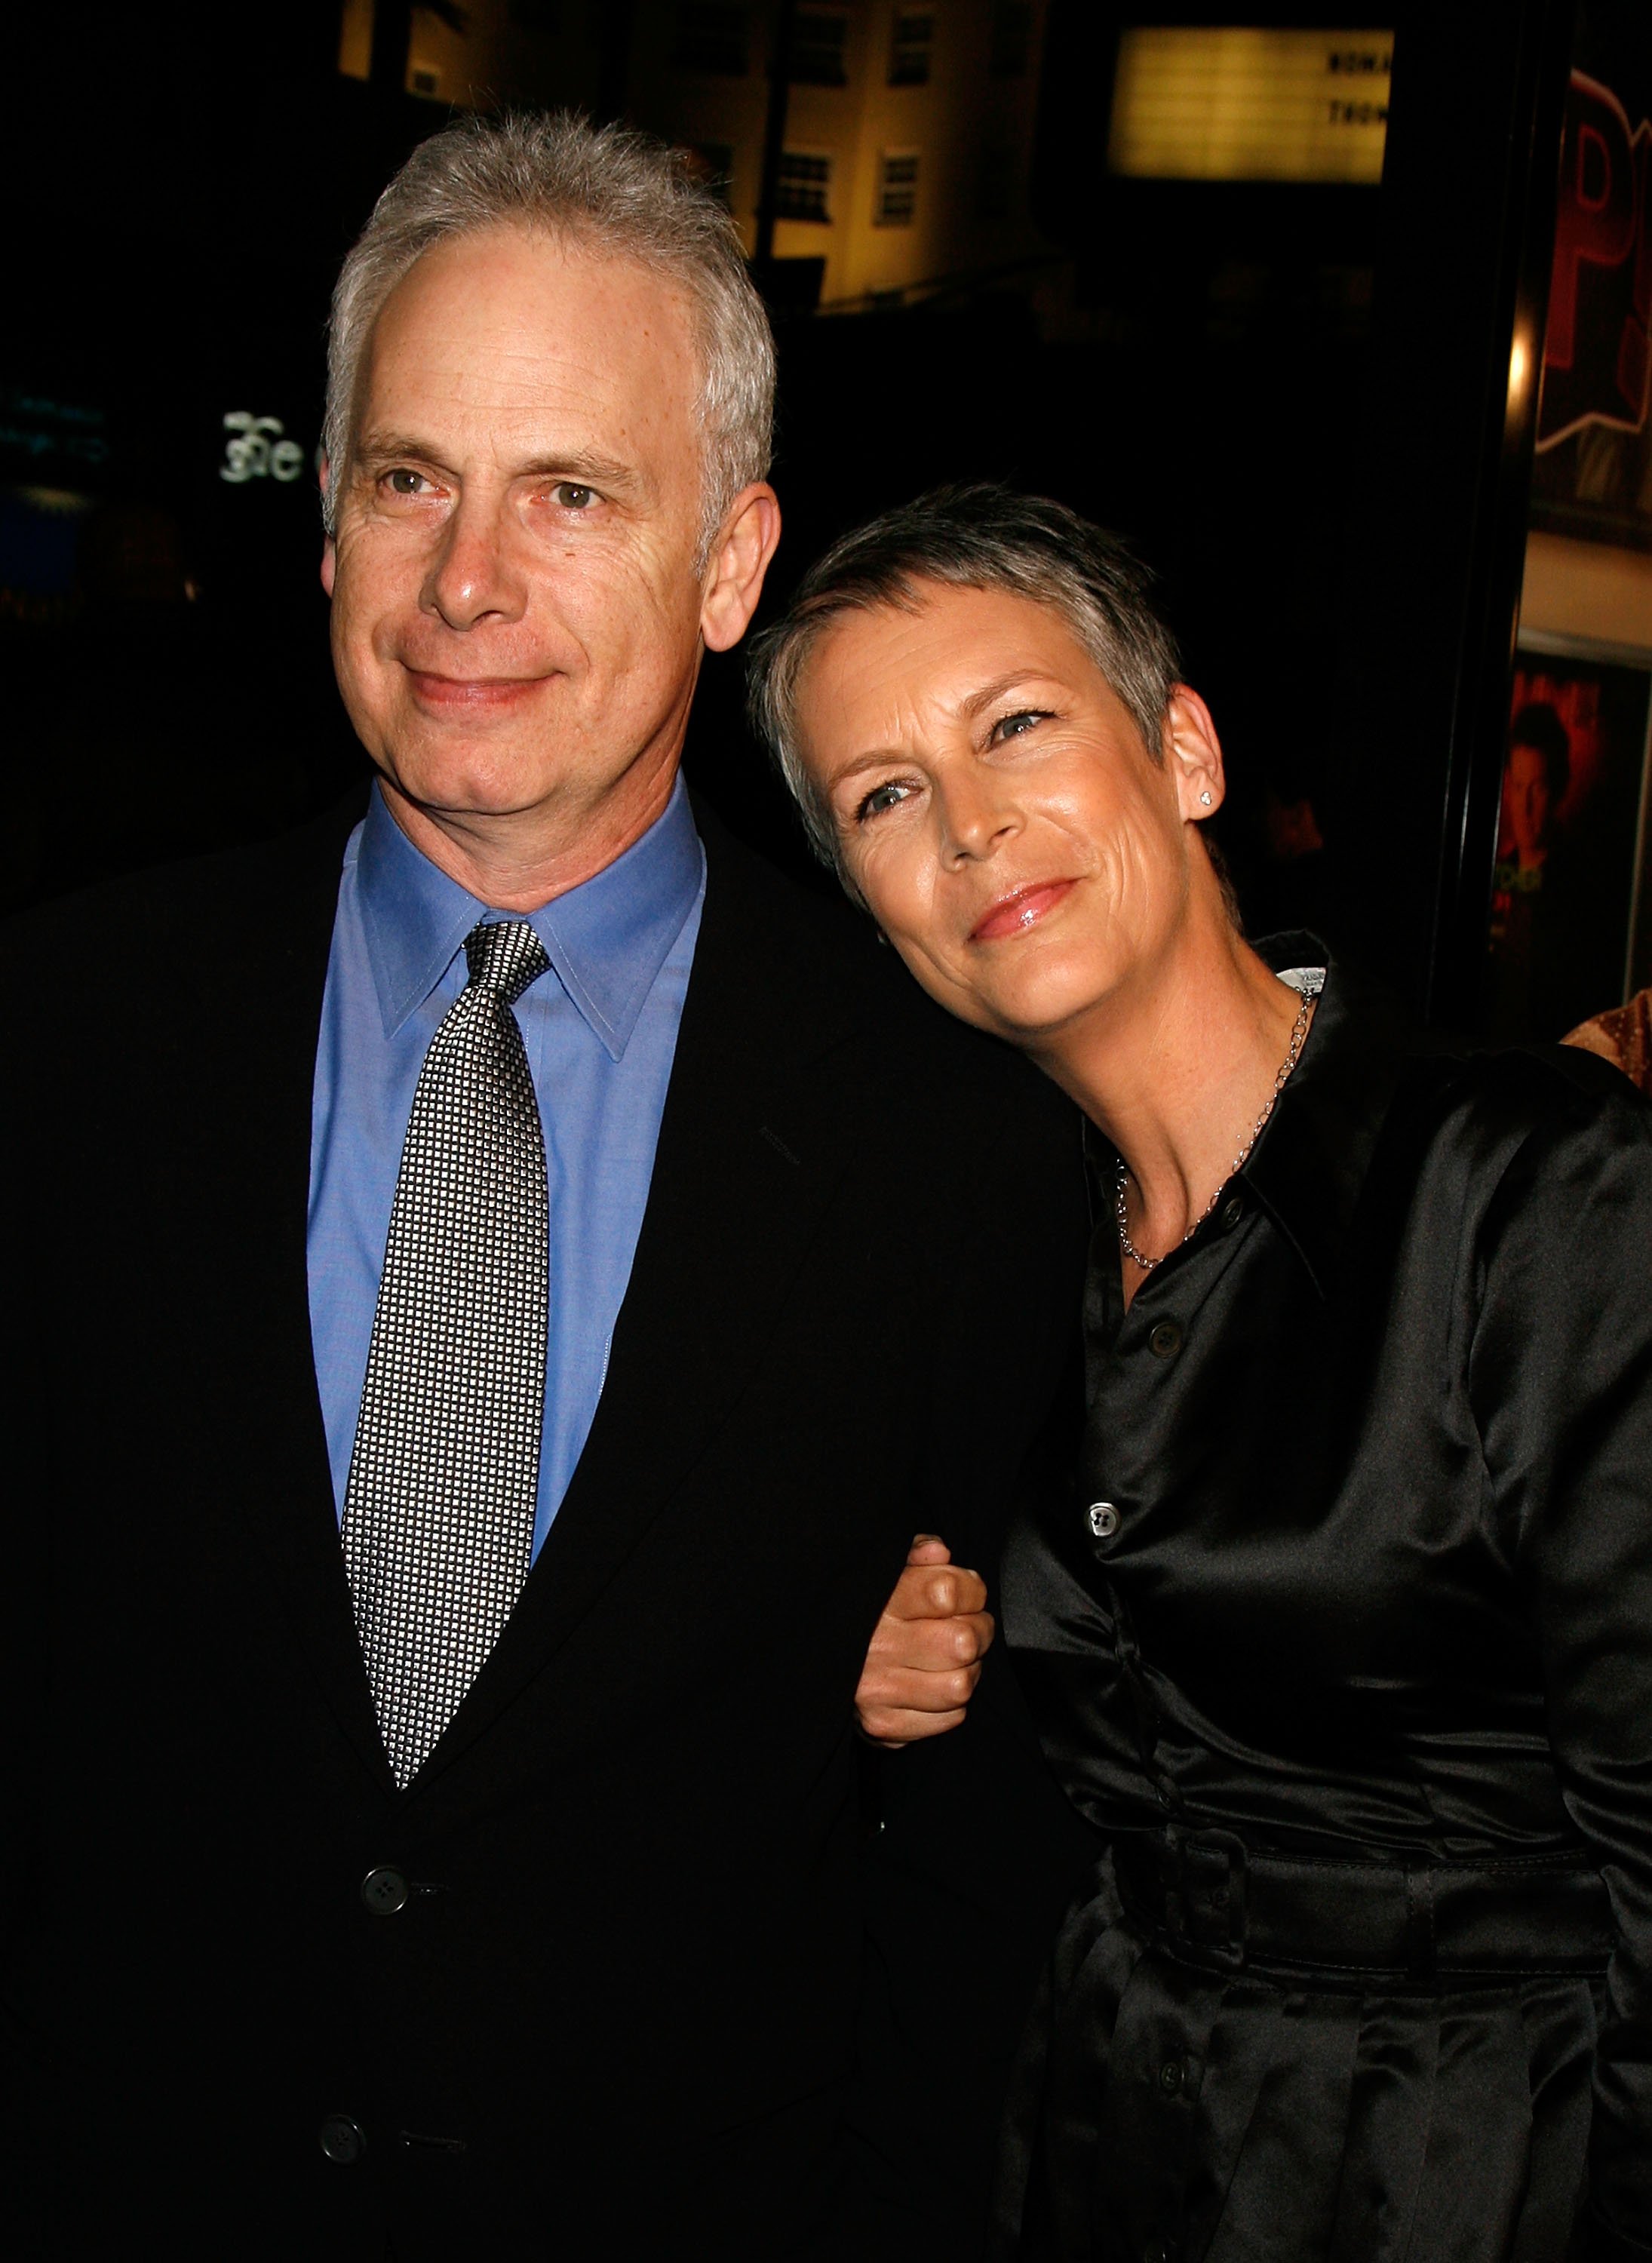 Jamie Lee Curtis and her husband Christopher Guest in Hollywood 2007. | Source: Getty Images